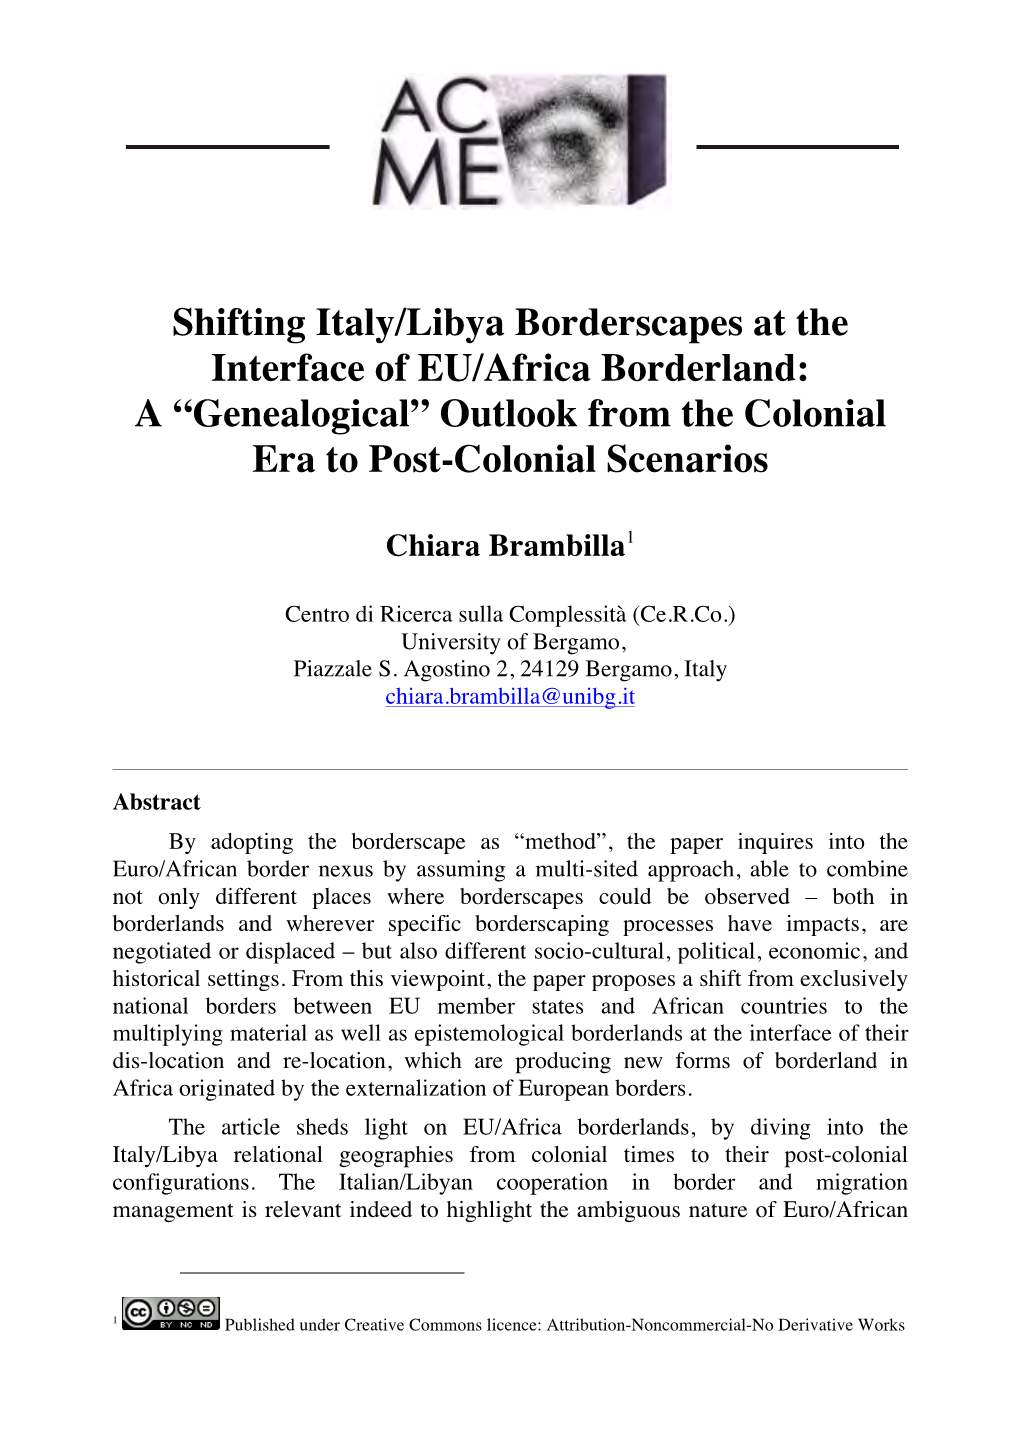 Shifting Italy/Libya Borderscapes at the Interface of EU/Africa Borderland: a “Genealogical” Outlook from the Colonial Era to Post-Colonial Scenarios